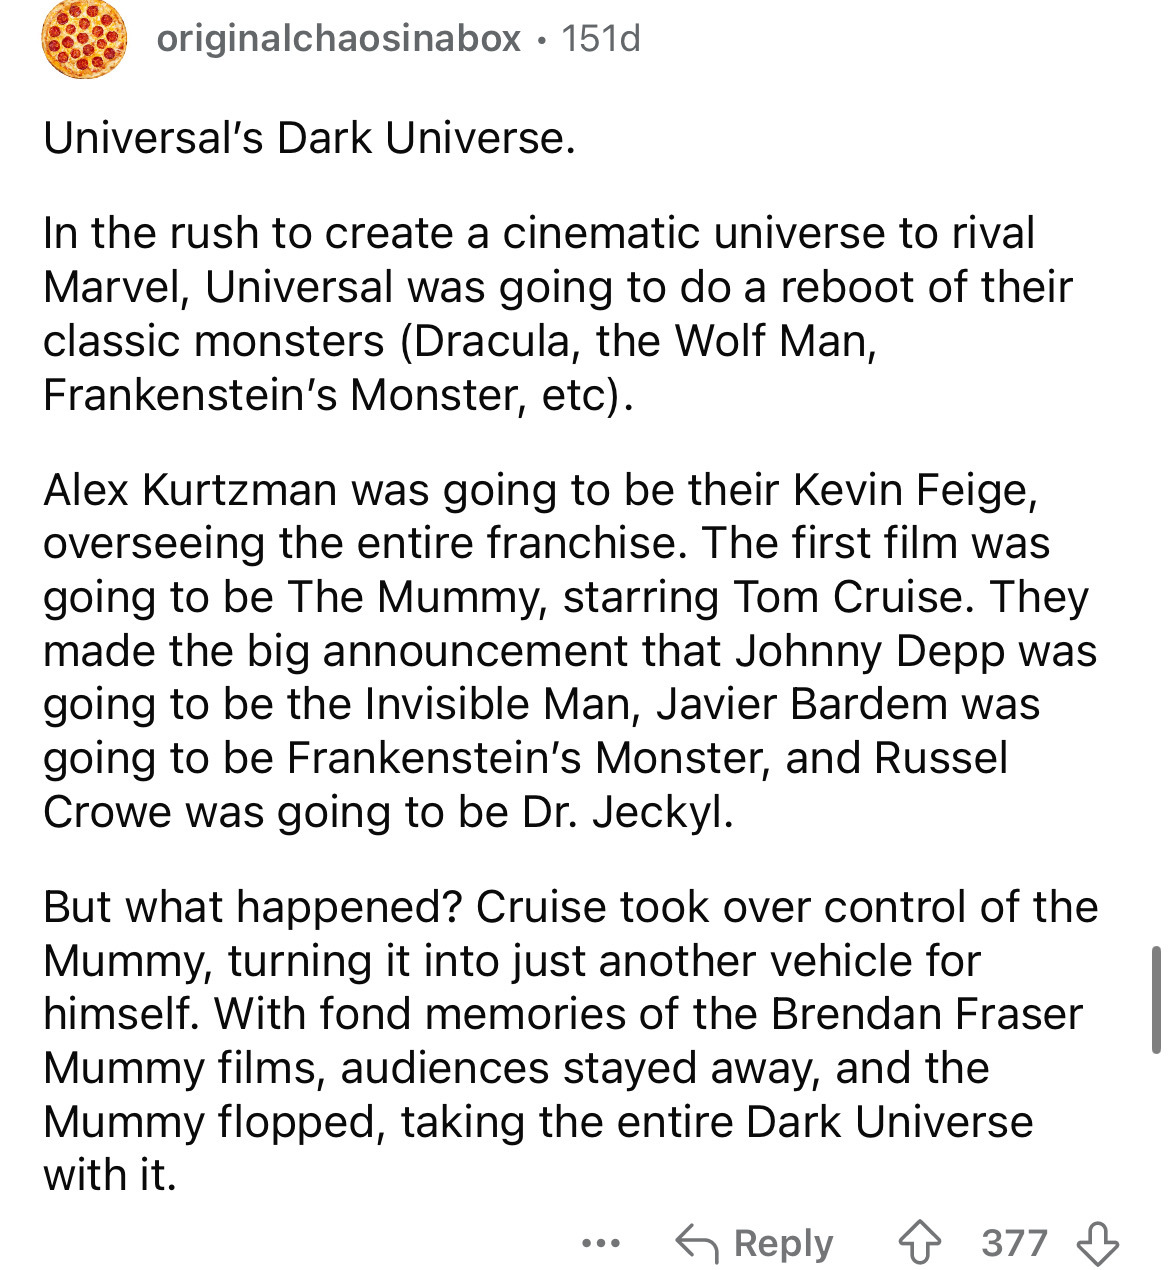 document - originalchaosinabox 151d Universal's Dark Universe. In the rush to create a cinematic universe to rival Marvel, Universal was going to do a reboot of their classic monsters Dracula, the Wolf Man, Frankenstein's Monster, etc. Alex Kurtzman was g